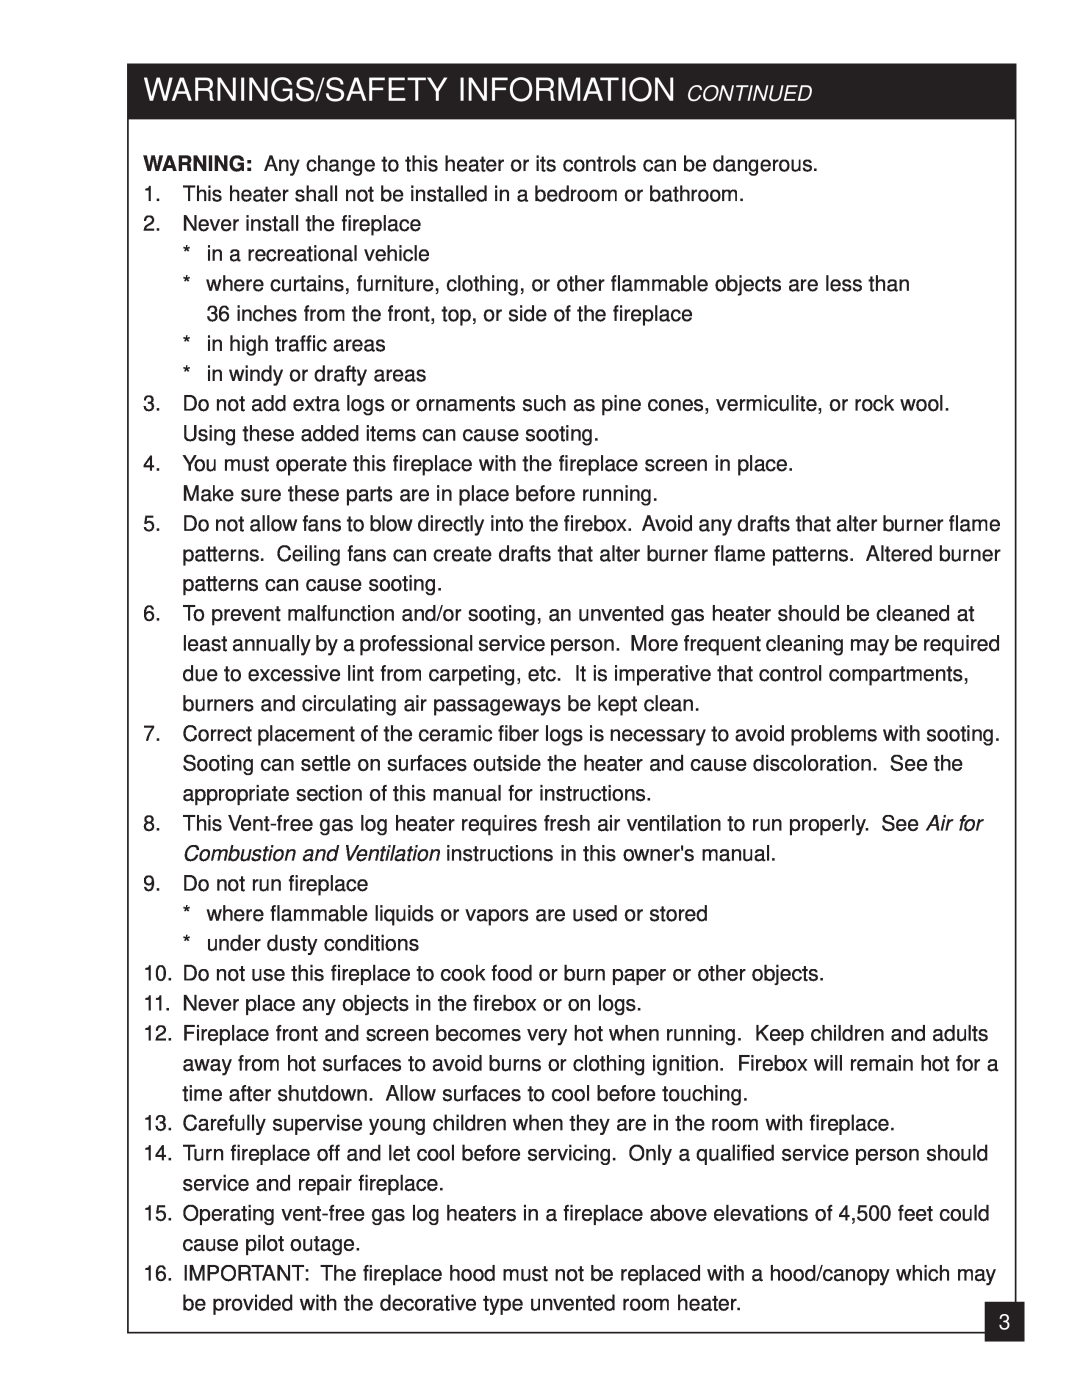 United States Stove 2020L installation manual Warnings/Safety Information Continued 